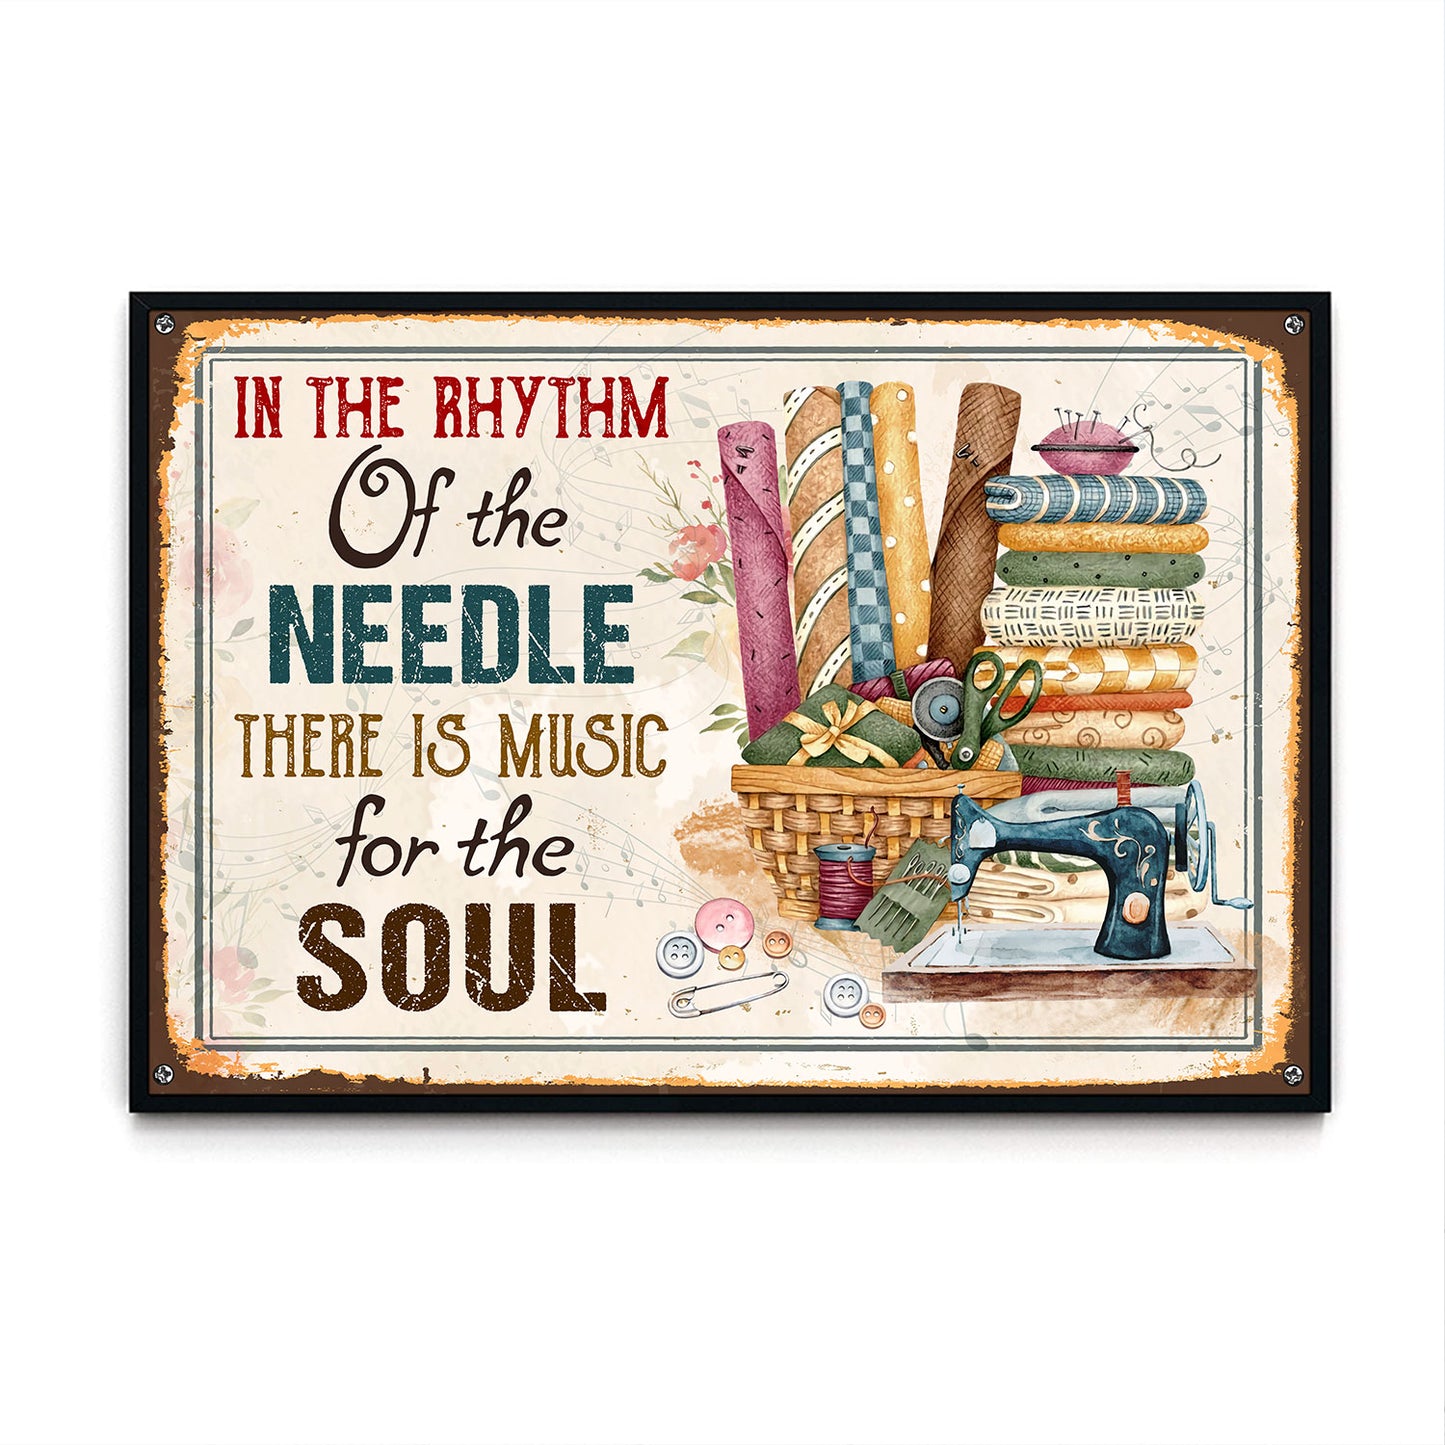 In The Rhythm Of The Needle There Is Music For The Soul Vintage 03Poster